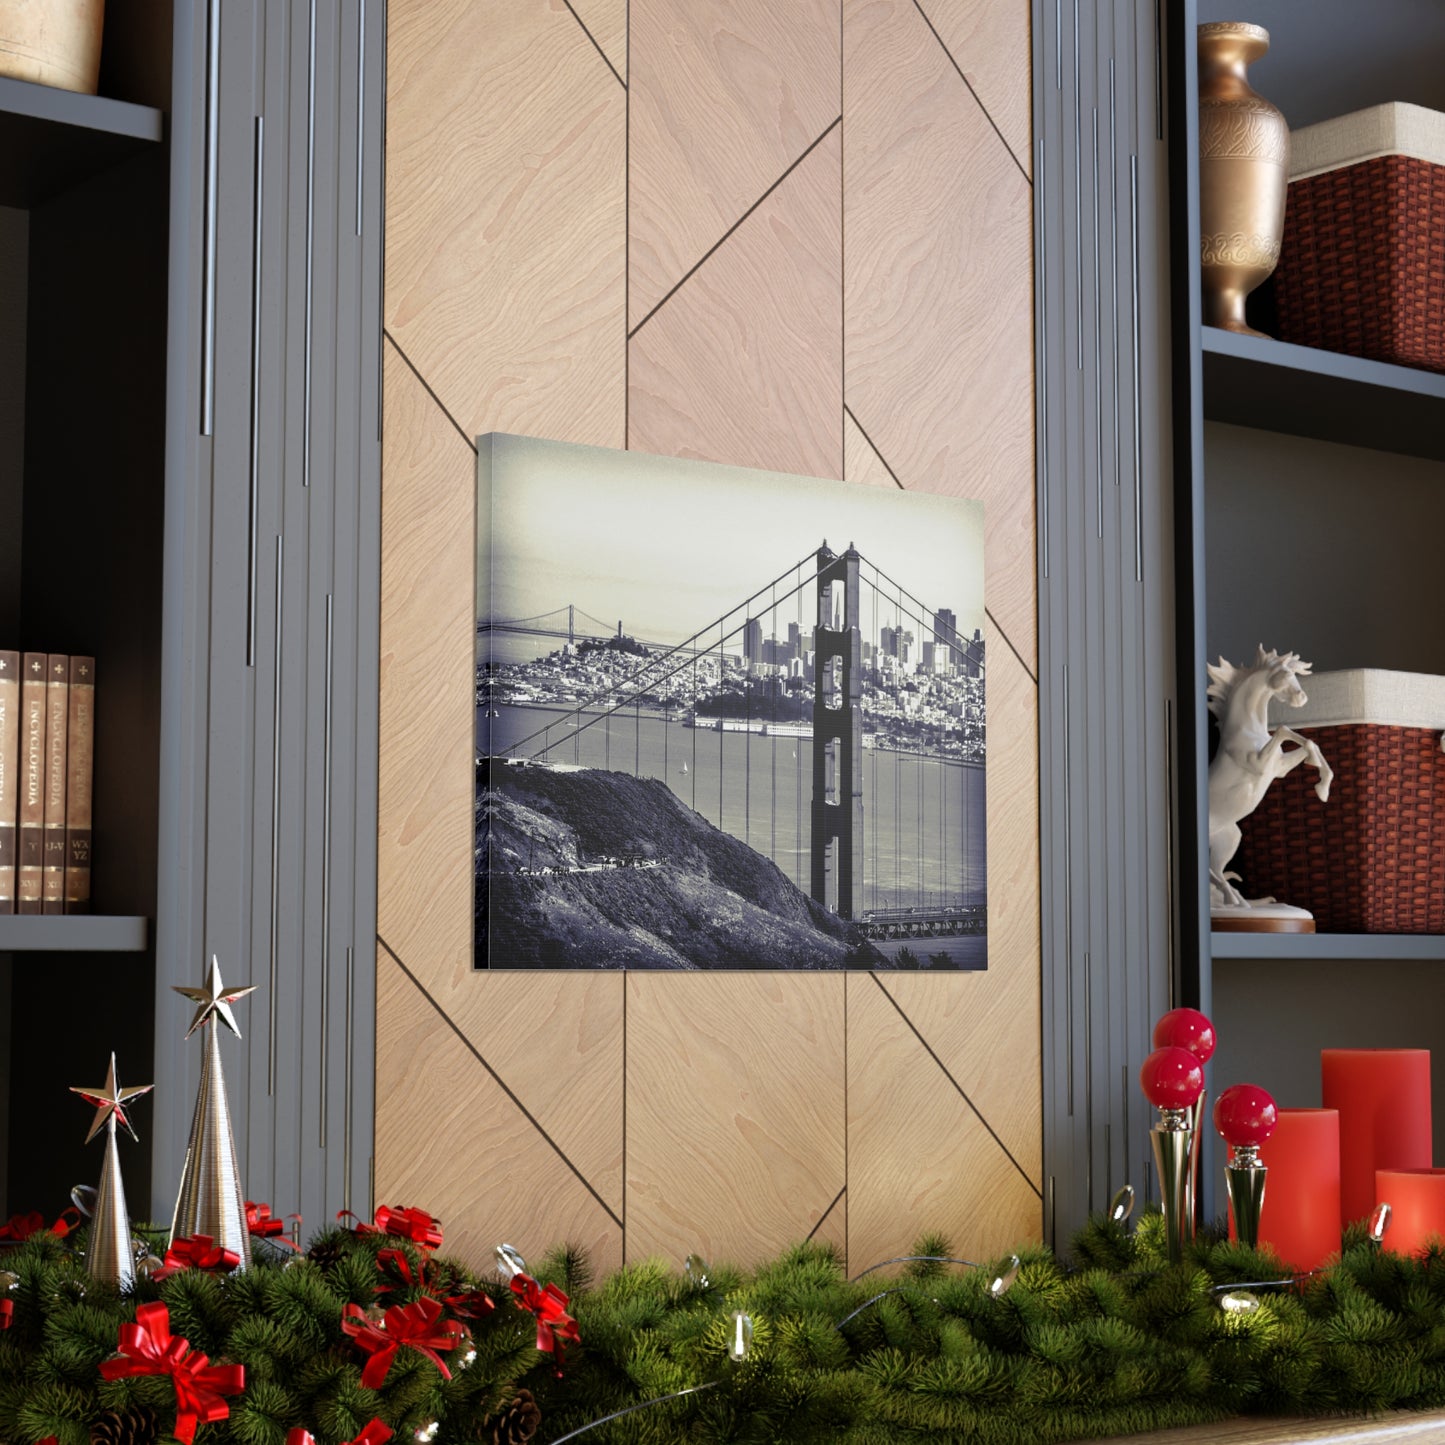 Canvas Print Of Golden Gate Bridge & Coit Tower In San Francisco For Wall Art